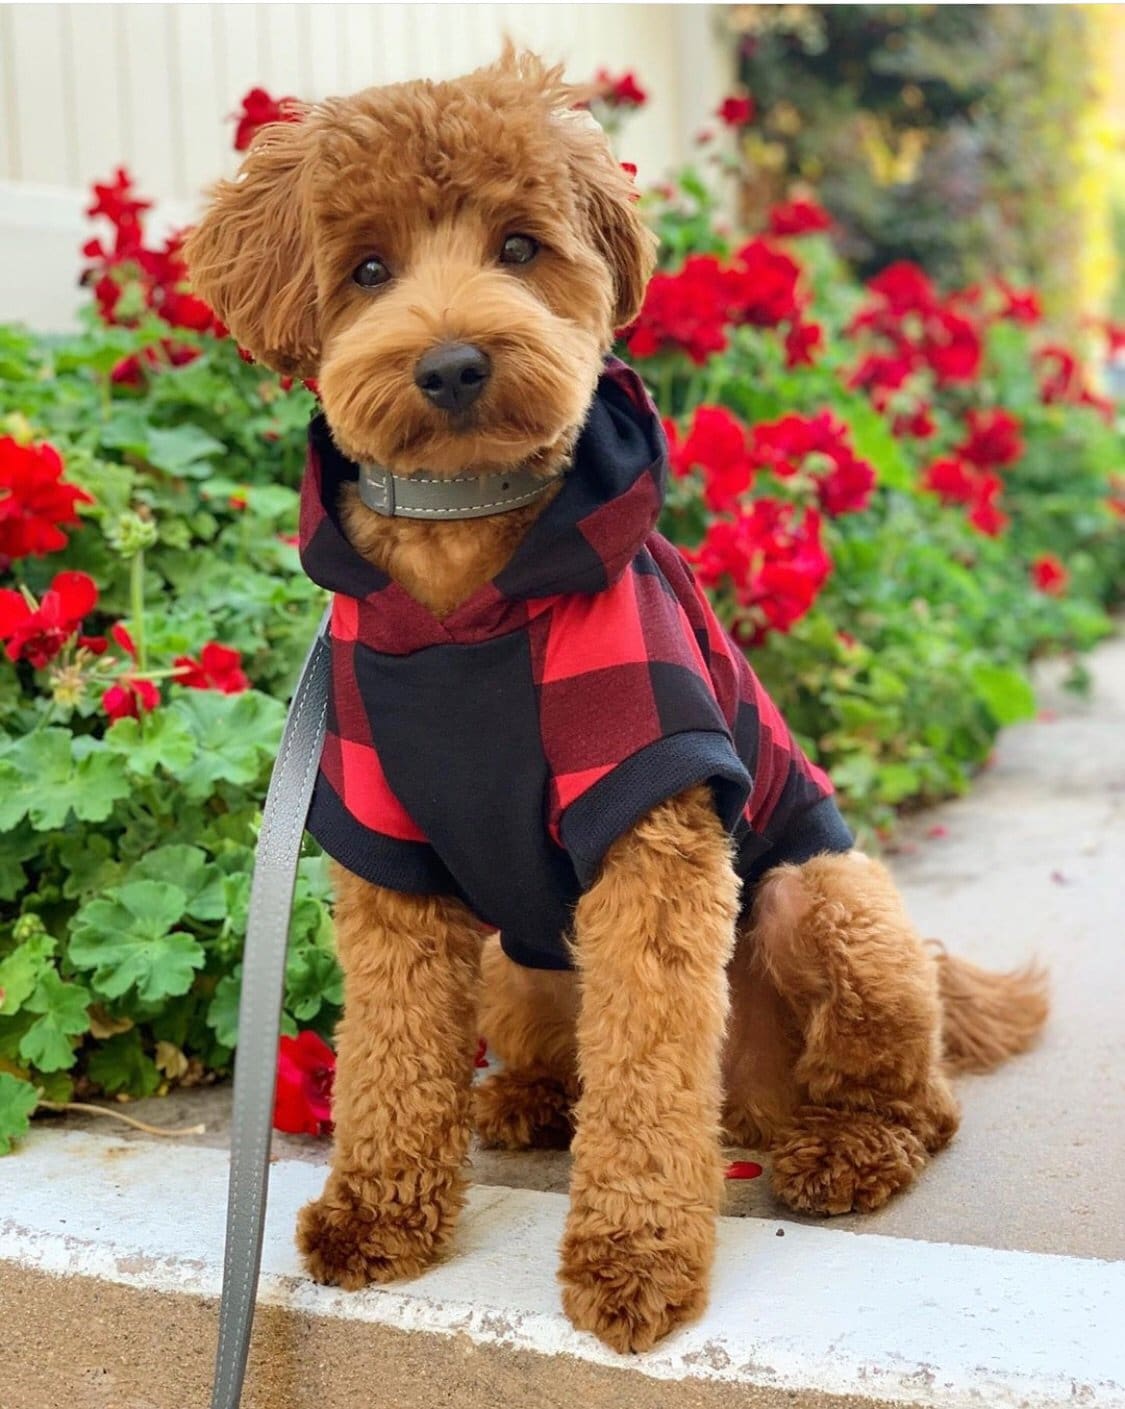 Bamboo Buffalo Plaid Dog Hoodie Harry Hoodie, Doodle Clothes, clothing for dogs, light weight dog hoodies, red dog hoodie, cute dog clothes